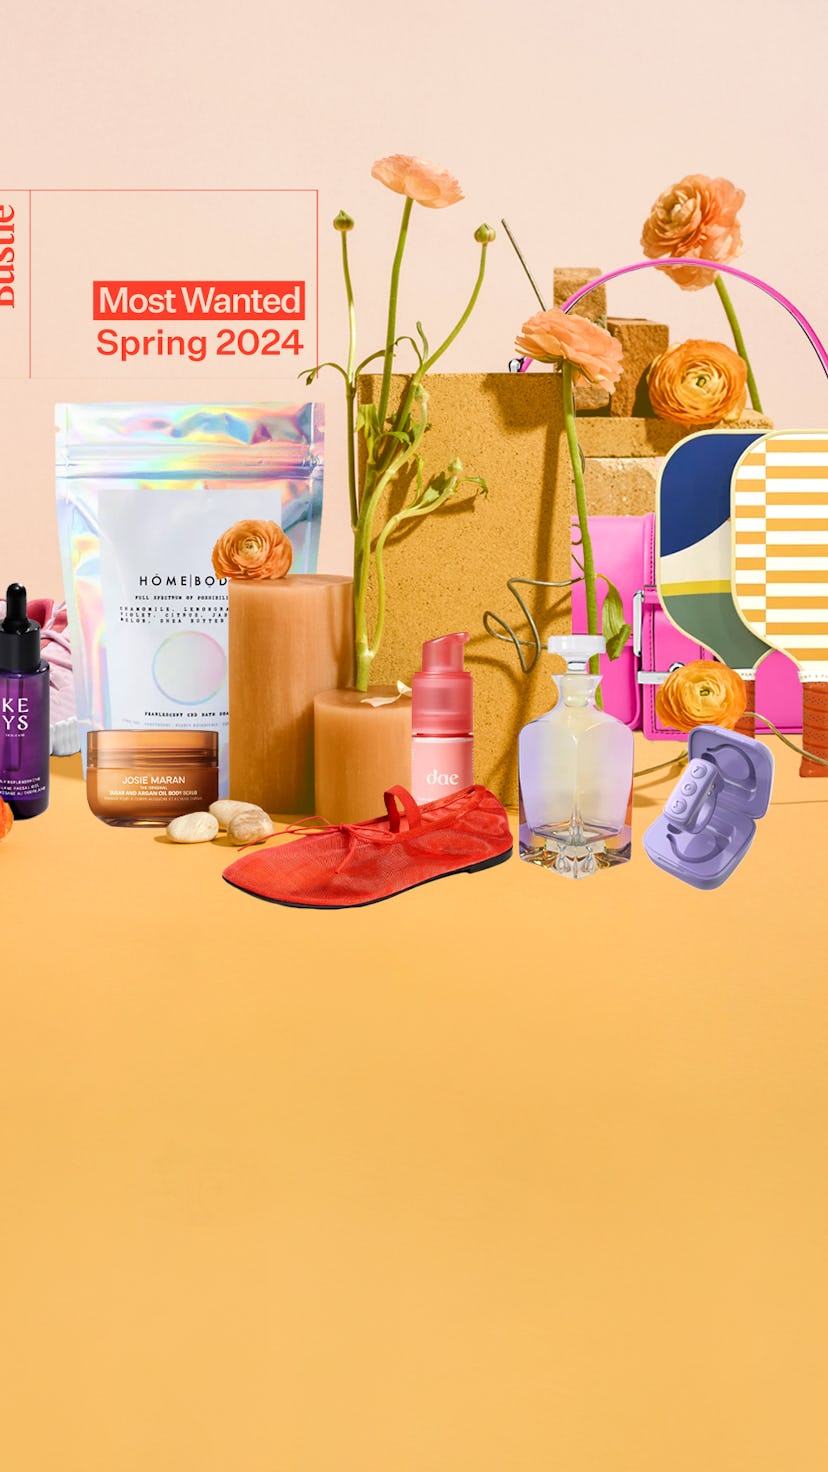 winners of bustle's most wanted spring, featuring beauty, fashion, home, and more products